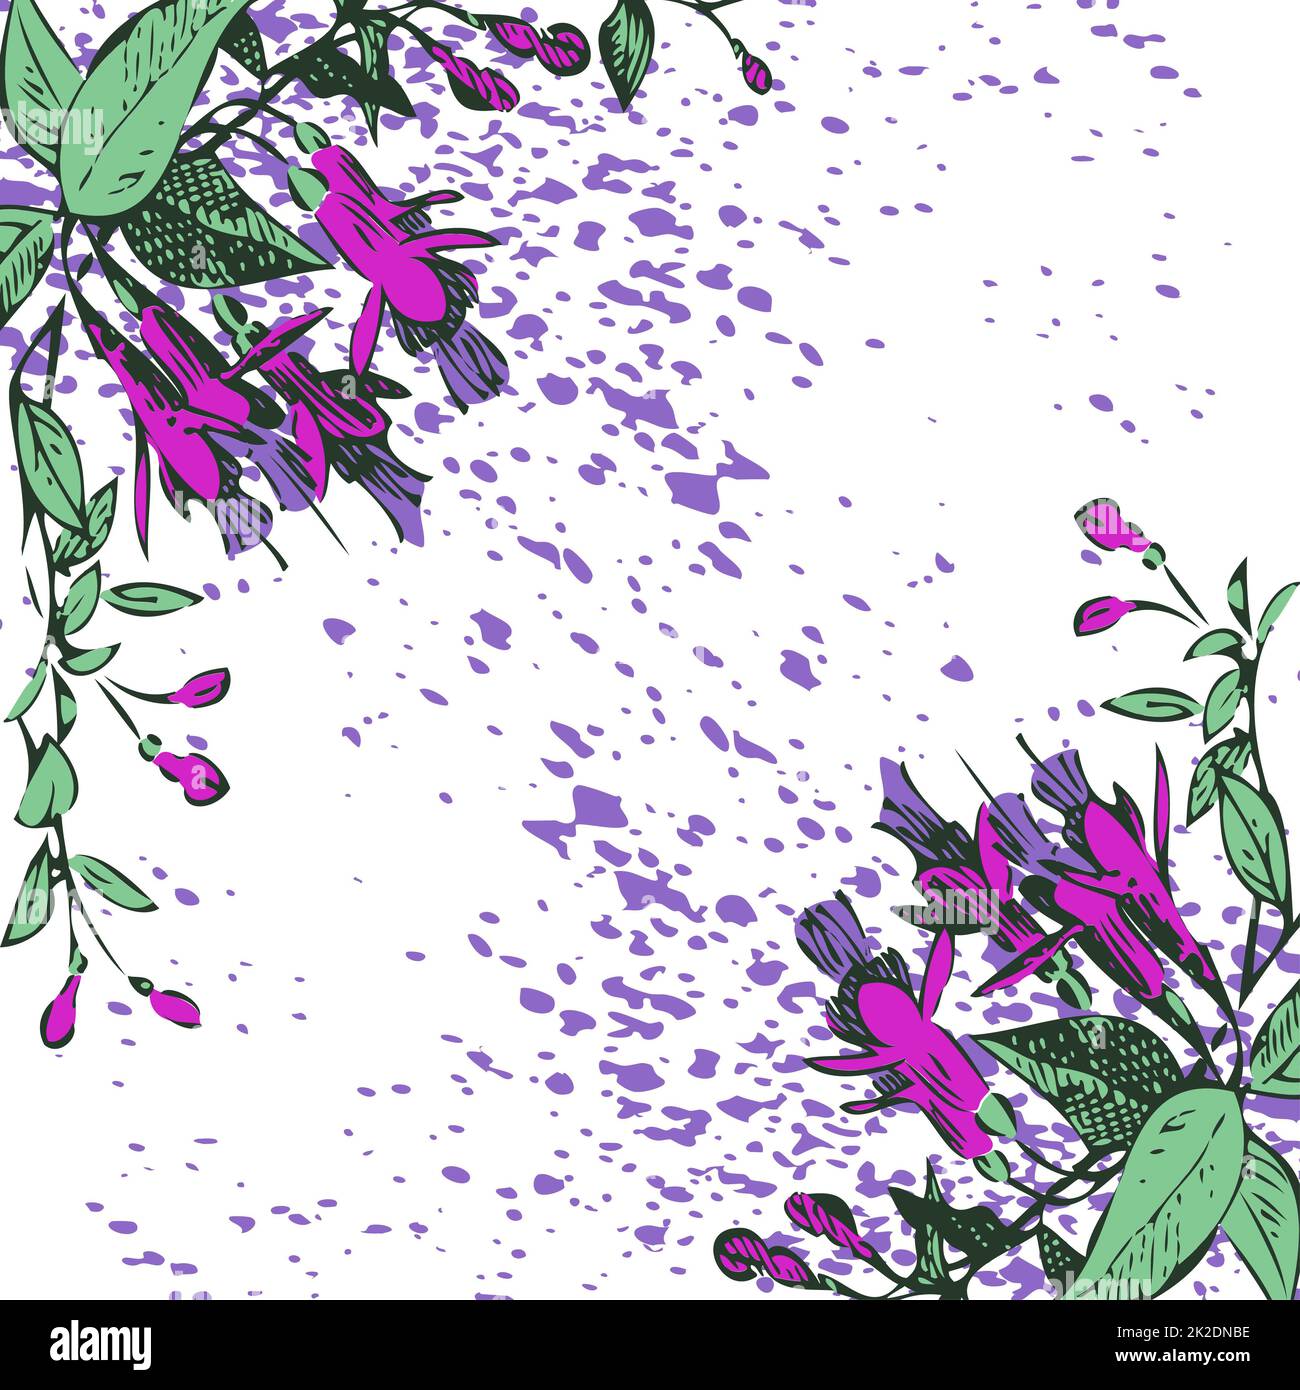 Attractively arranged bunch of flowers on white bacground. Drawn fuchsia flowers, artistic vector illustration. Floral botanical trendy pattern frame, graphic design with watercolor splatter Stock Photo